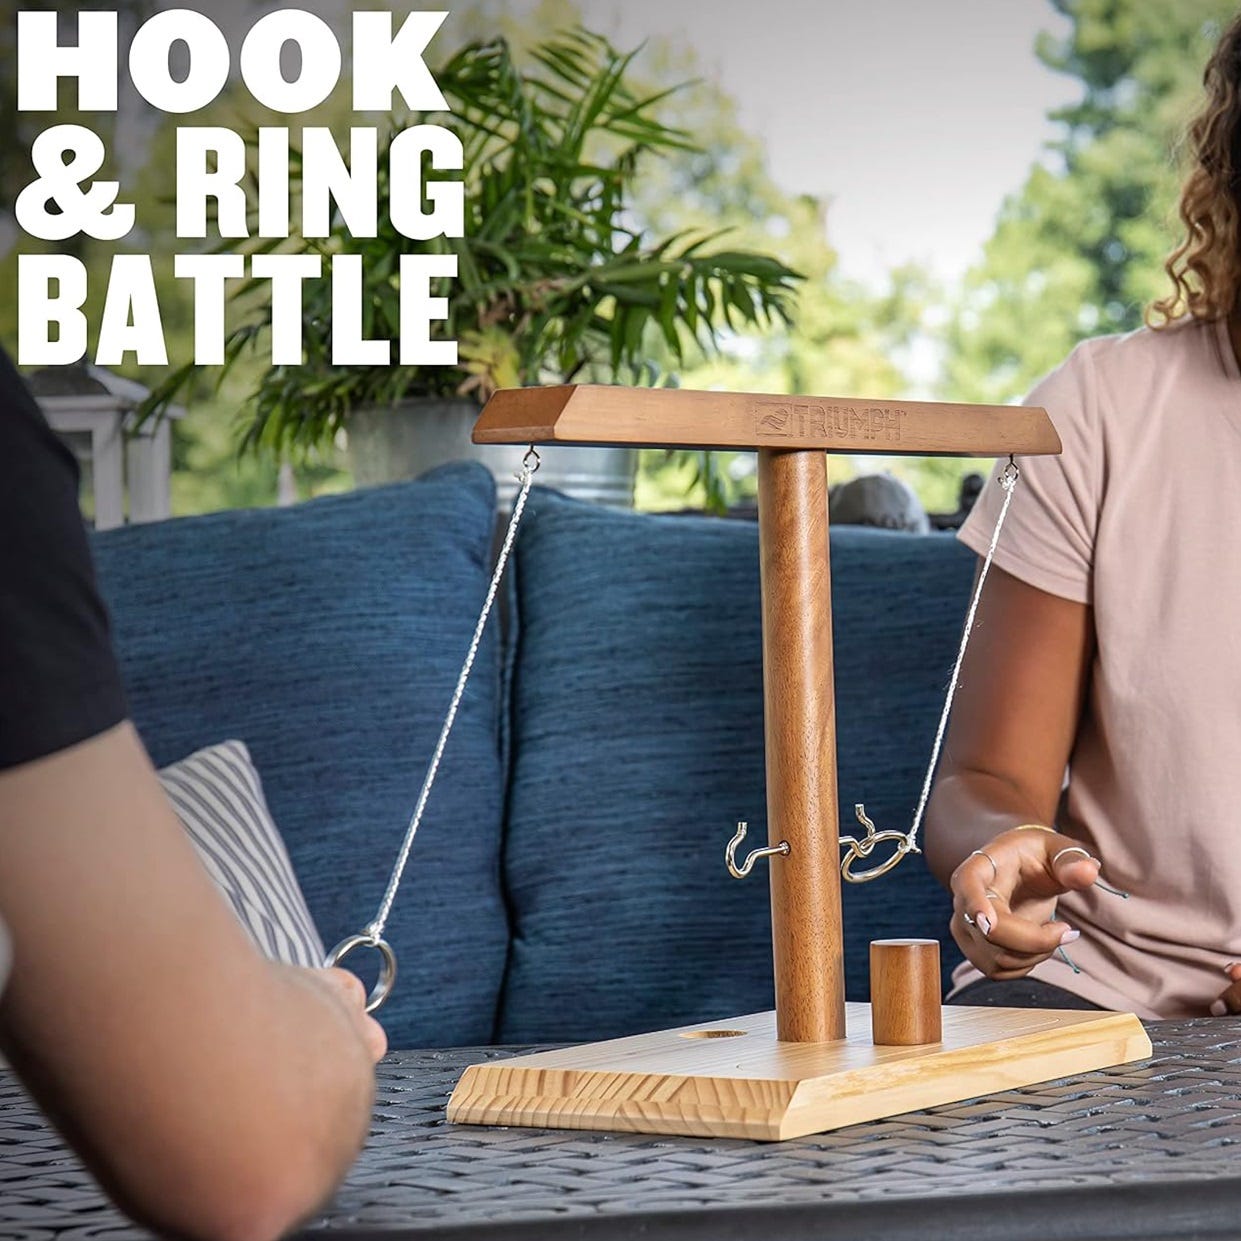 A tabletop hook and ring toss game with two players present.